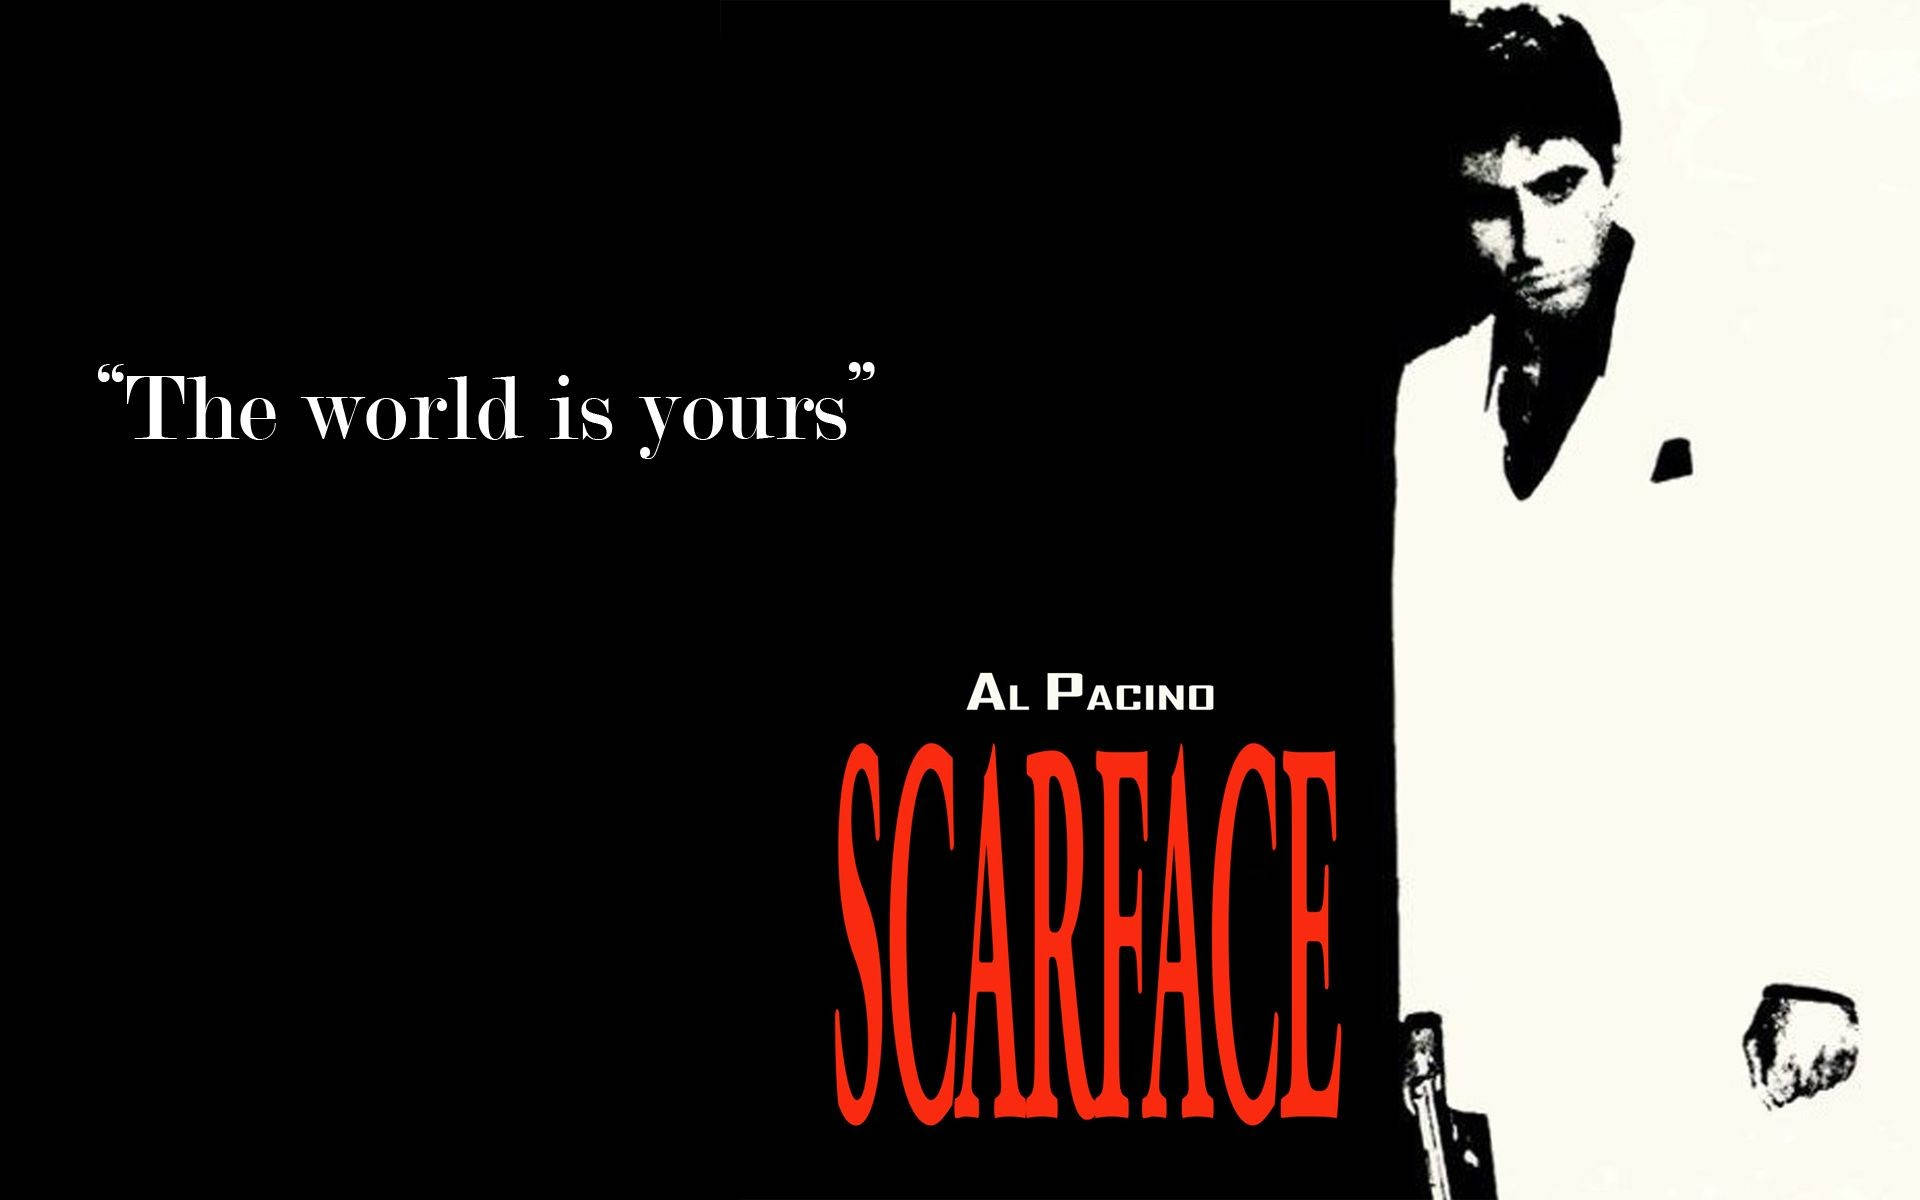 Al Pacino Scarface The World Is Yours Background